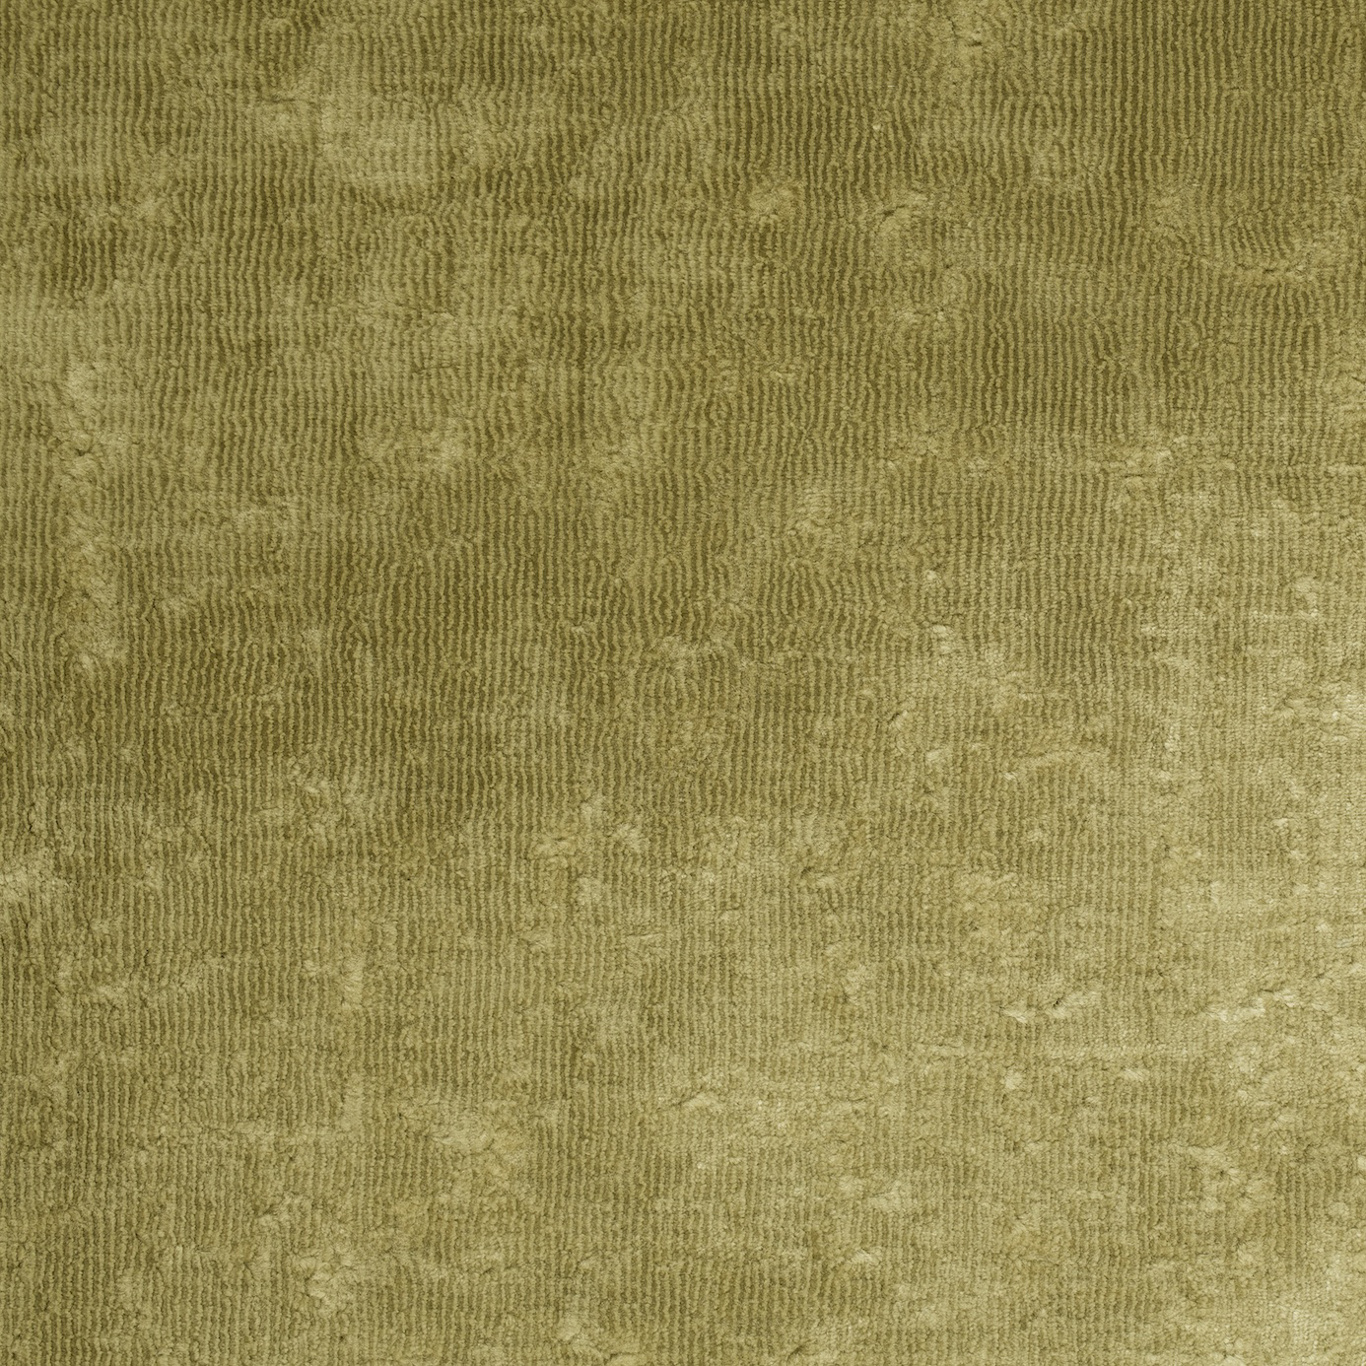 Curzon Old Gold Fabric by ZOF